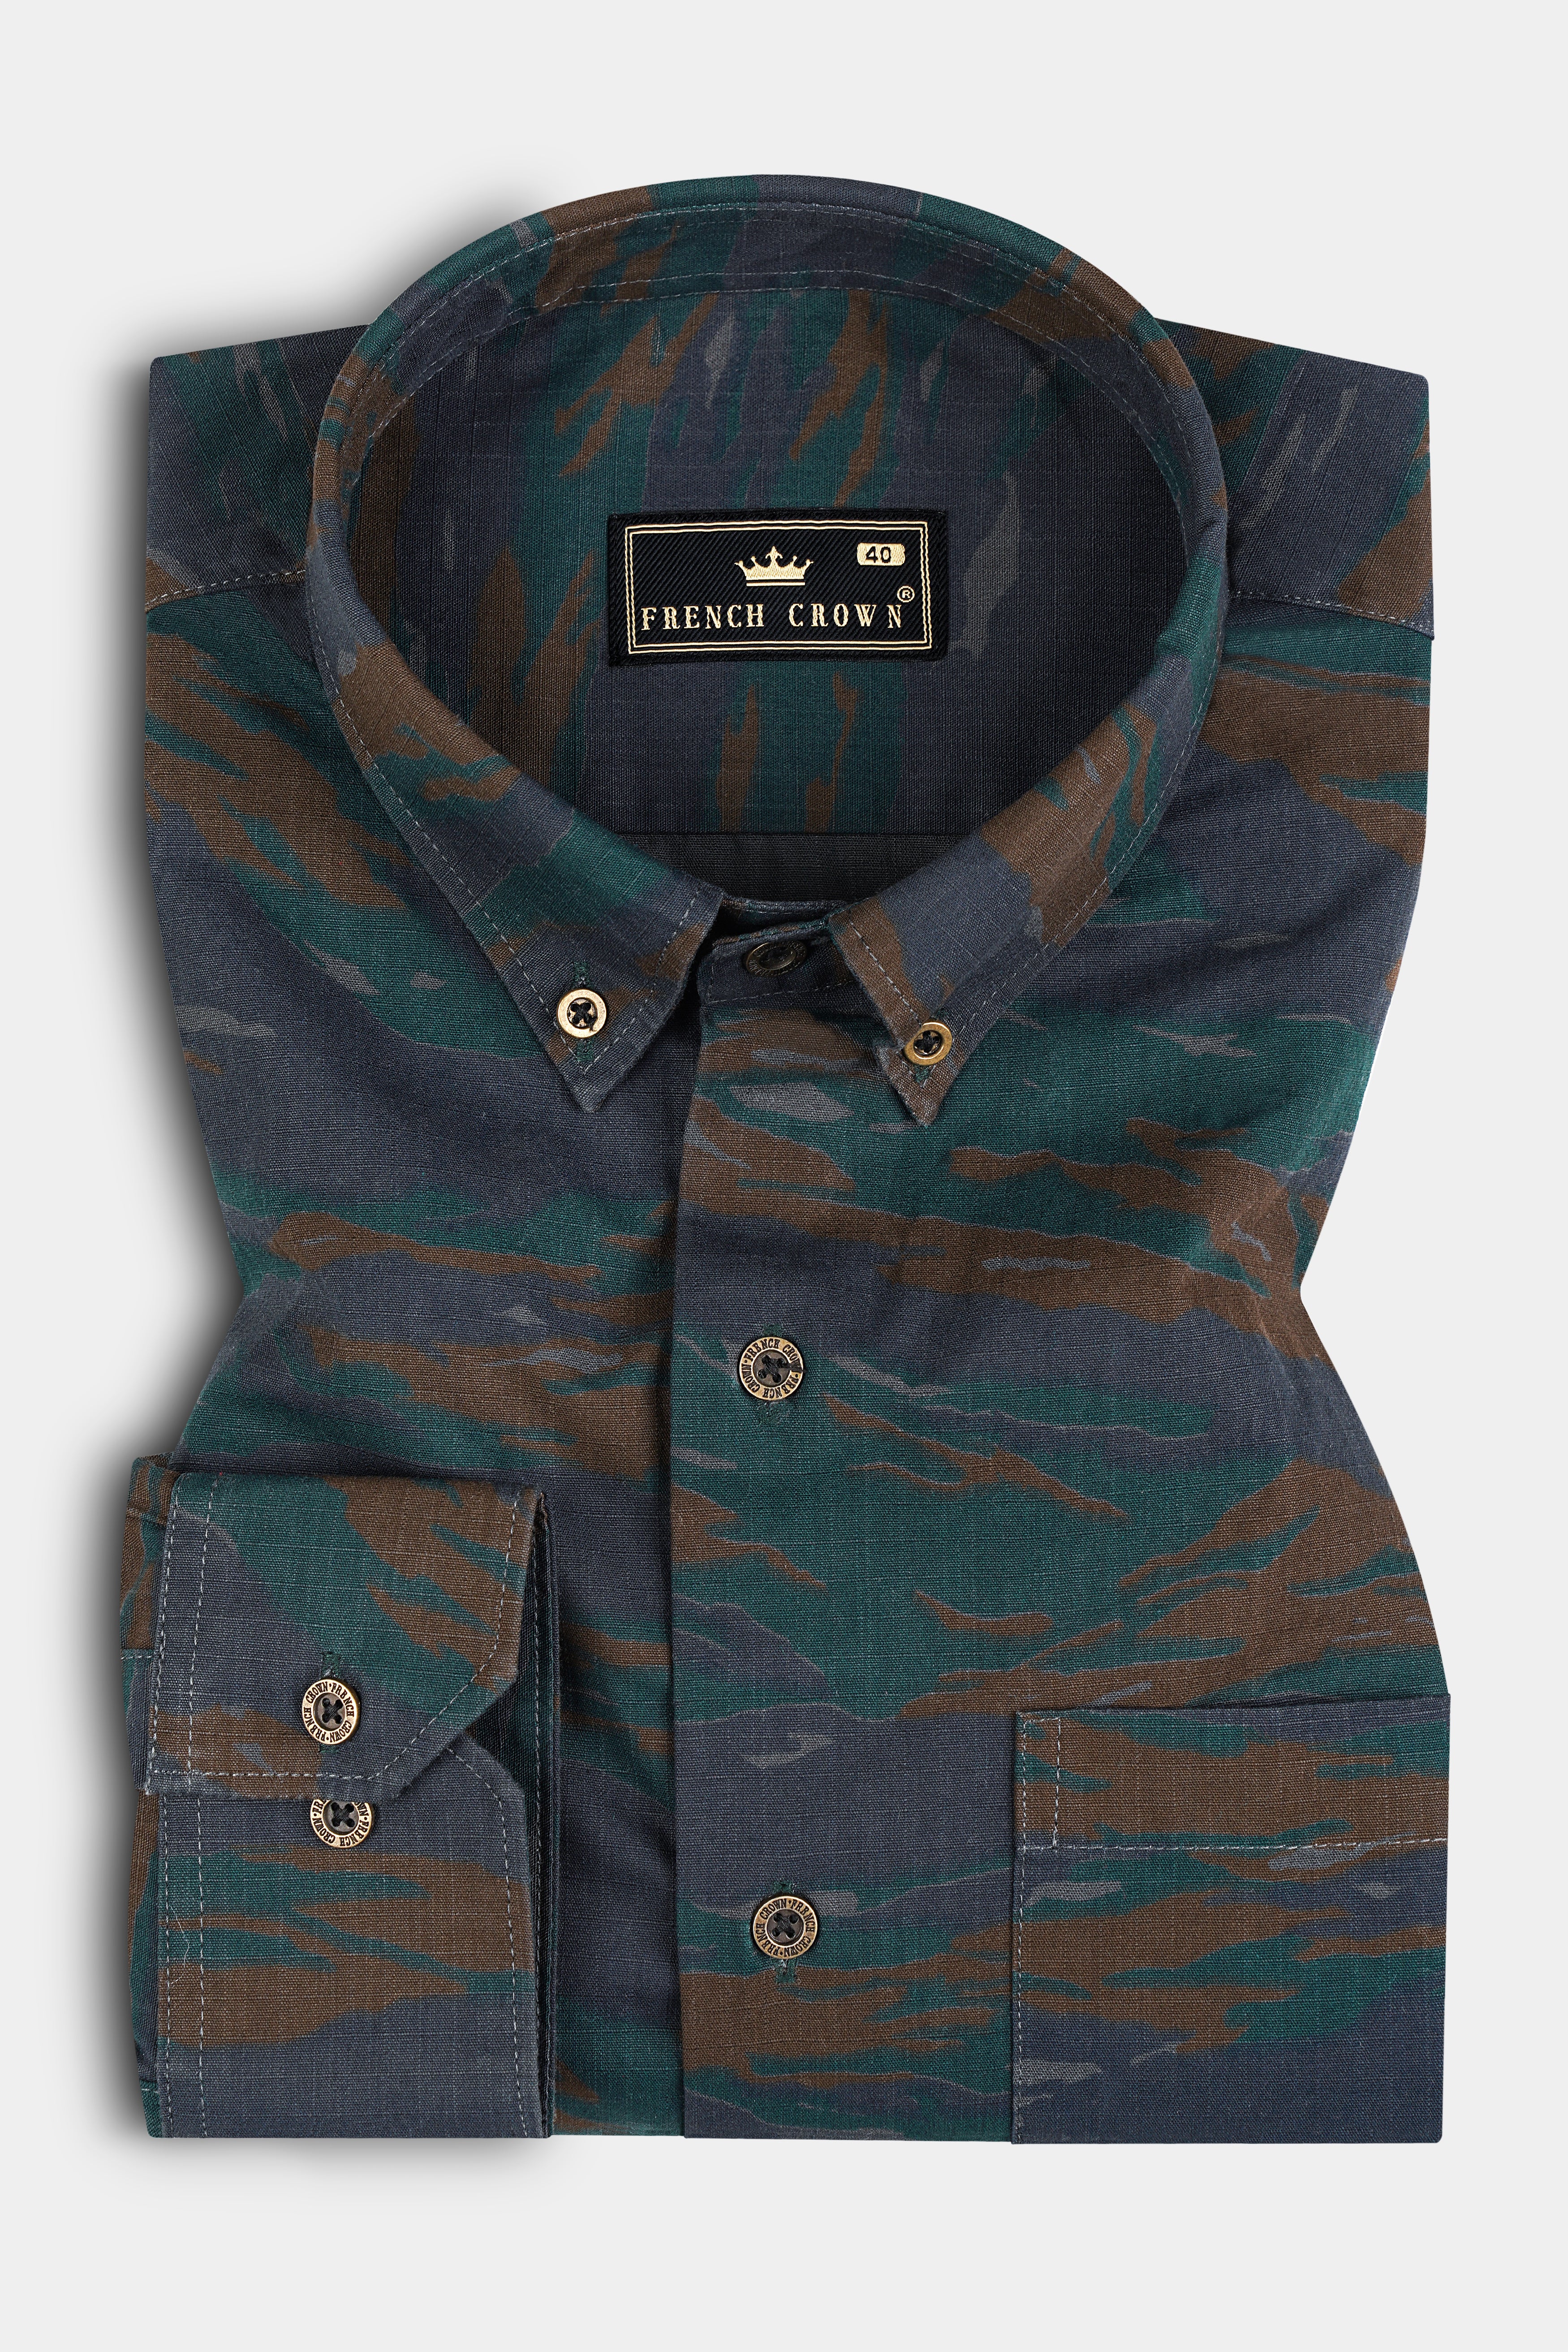 Spectra Green with Charcoal Gray Camouflage Royal Oxford Shirt